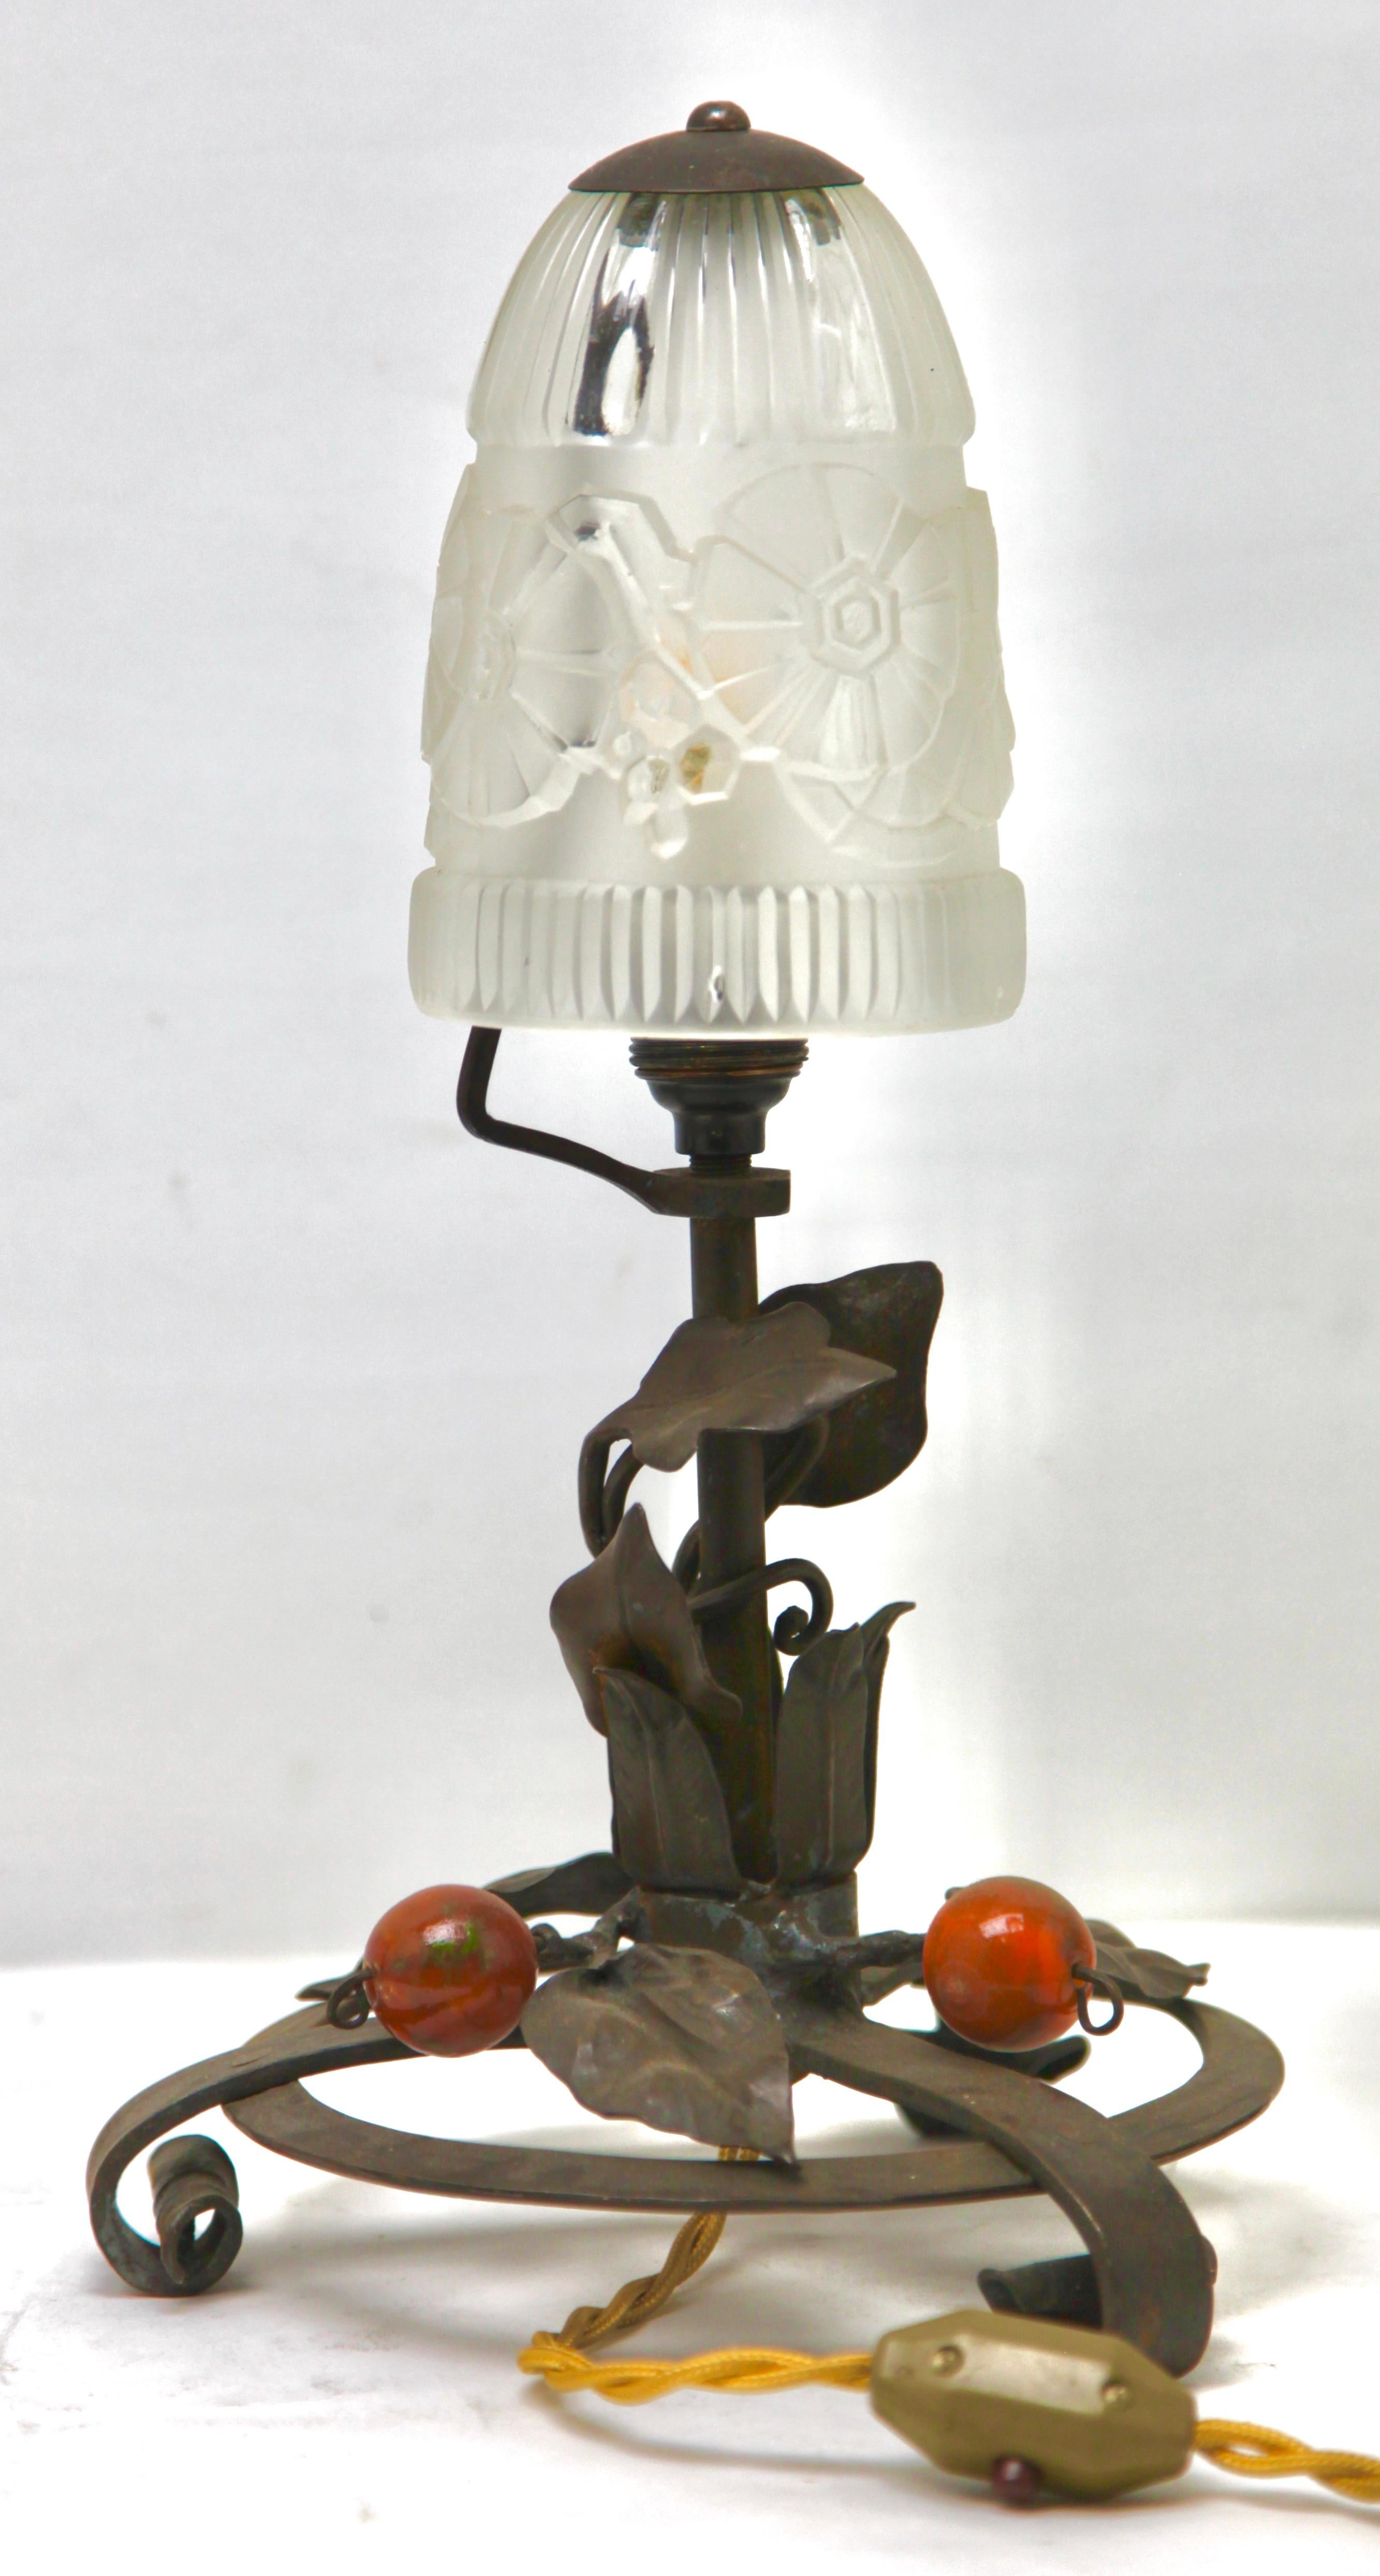 The 1920s, France
A wonderful French Art Nouveau lamp. The stands are handmade in wrought iron with black finish patina and hammered with a floral pattern. The metalwork is of excellent quality.
Crowned with bright shade in Molded glass.
In